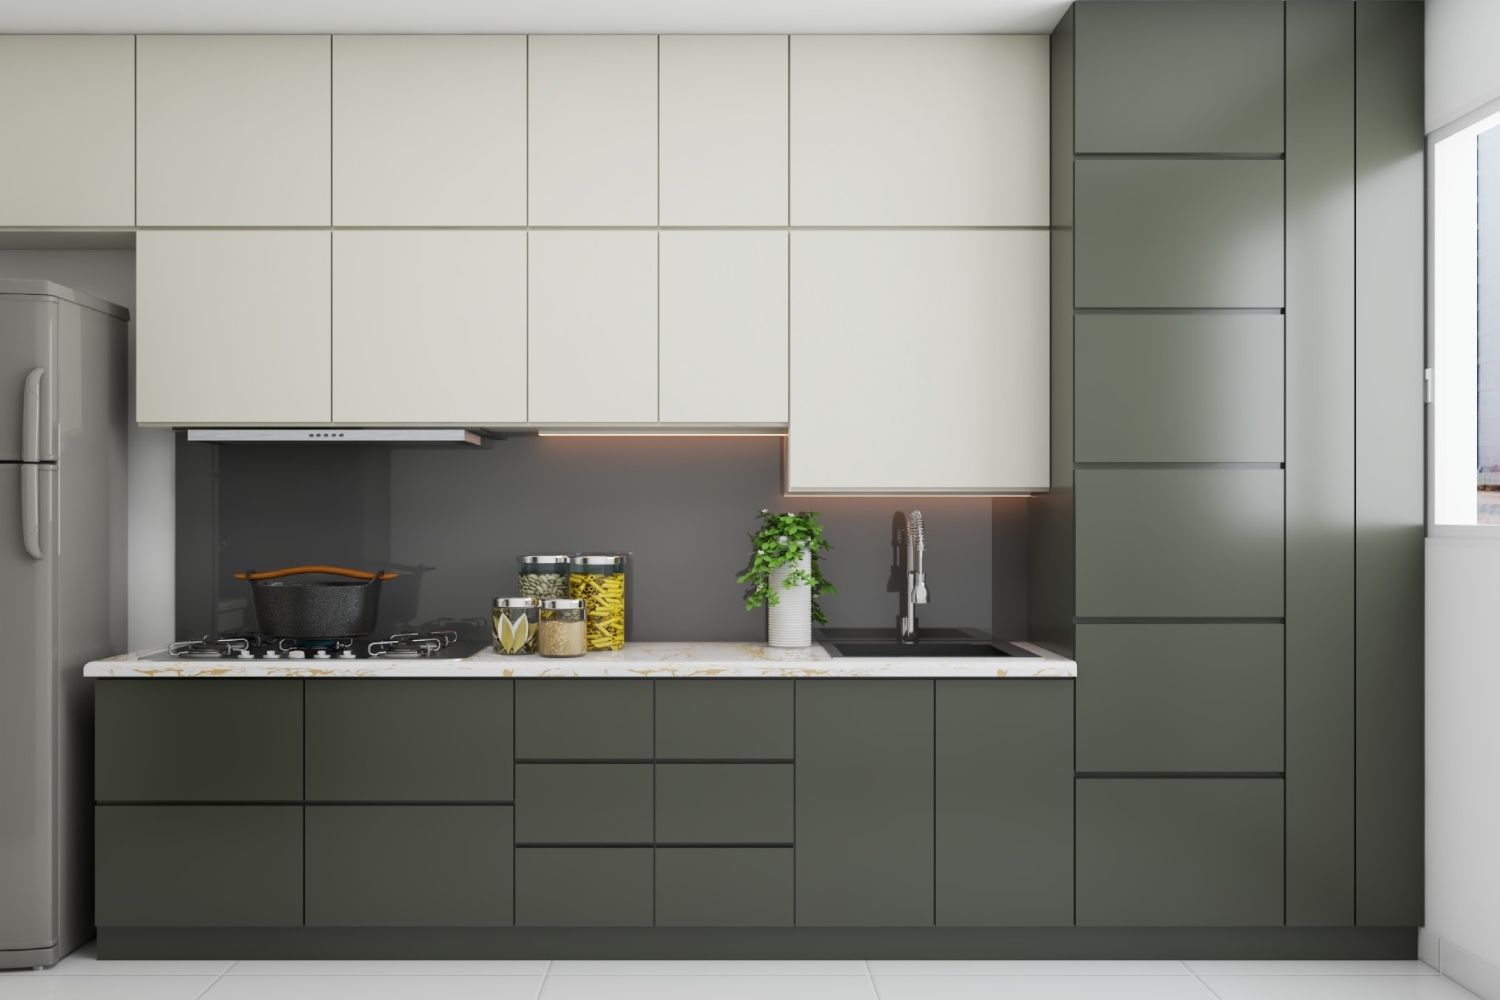 Contemporary Green And White Laminate Design For Kitchen Cabinets